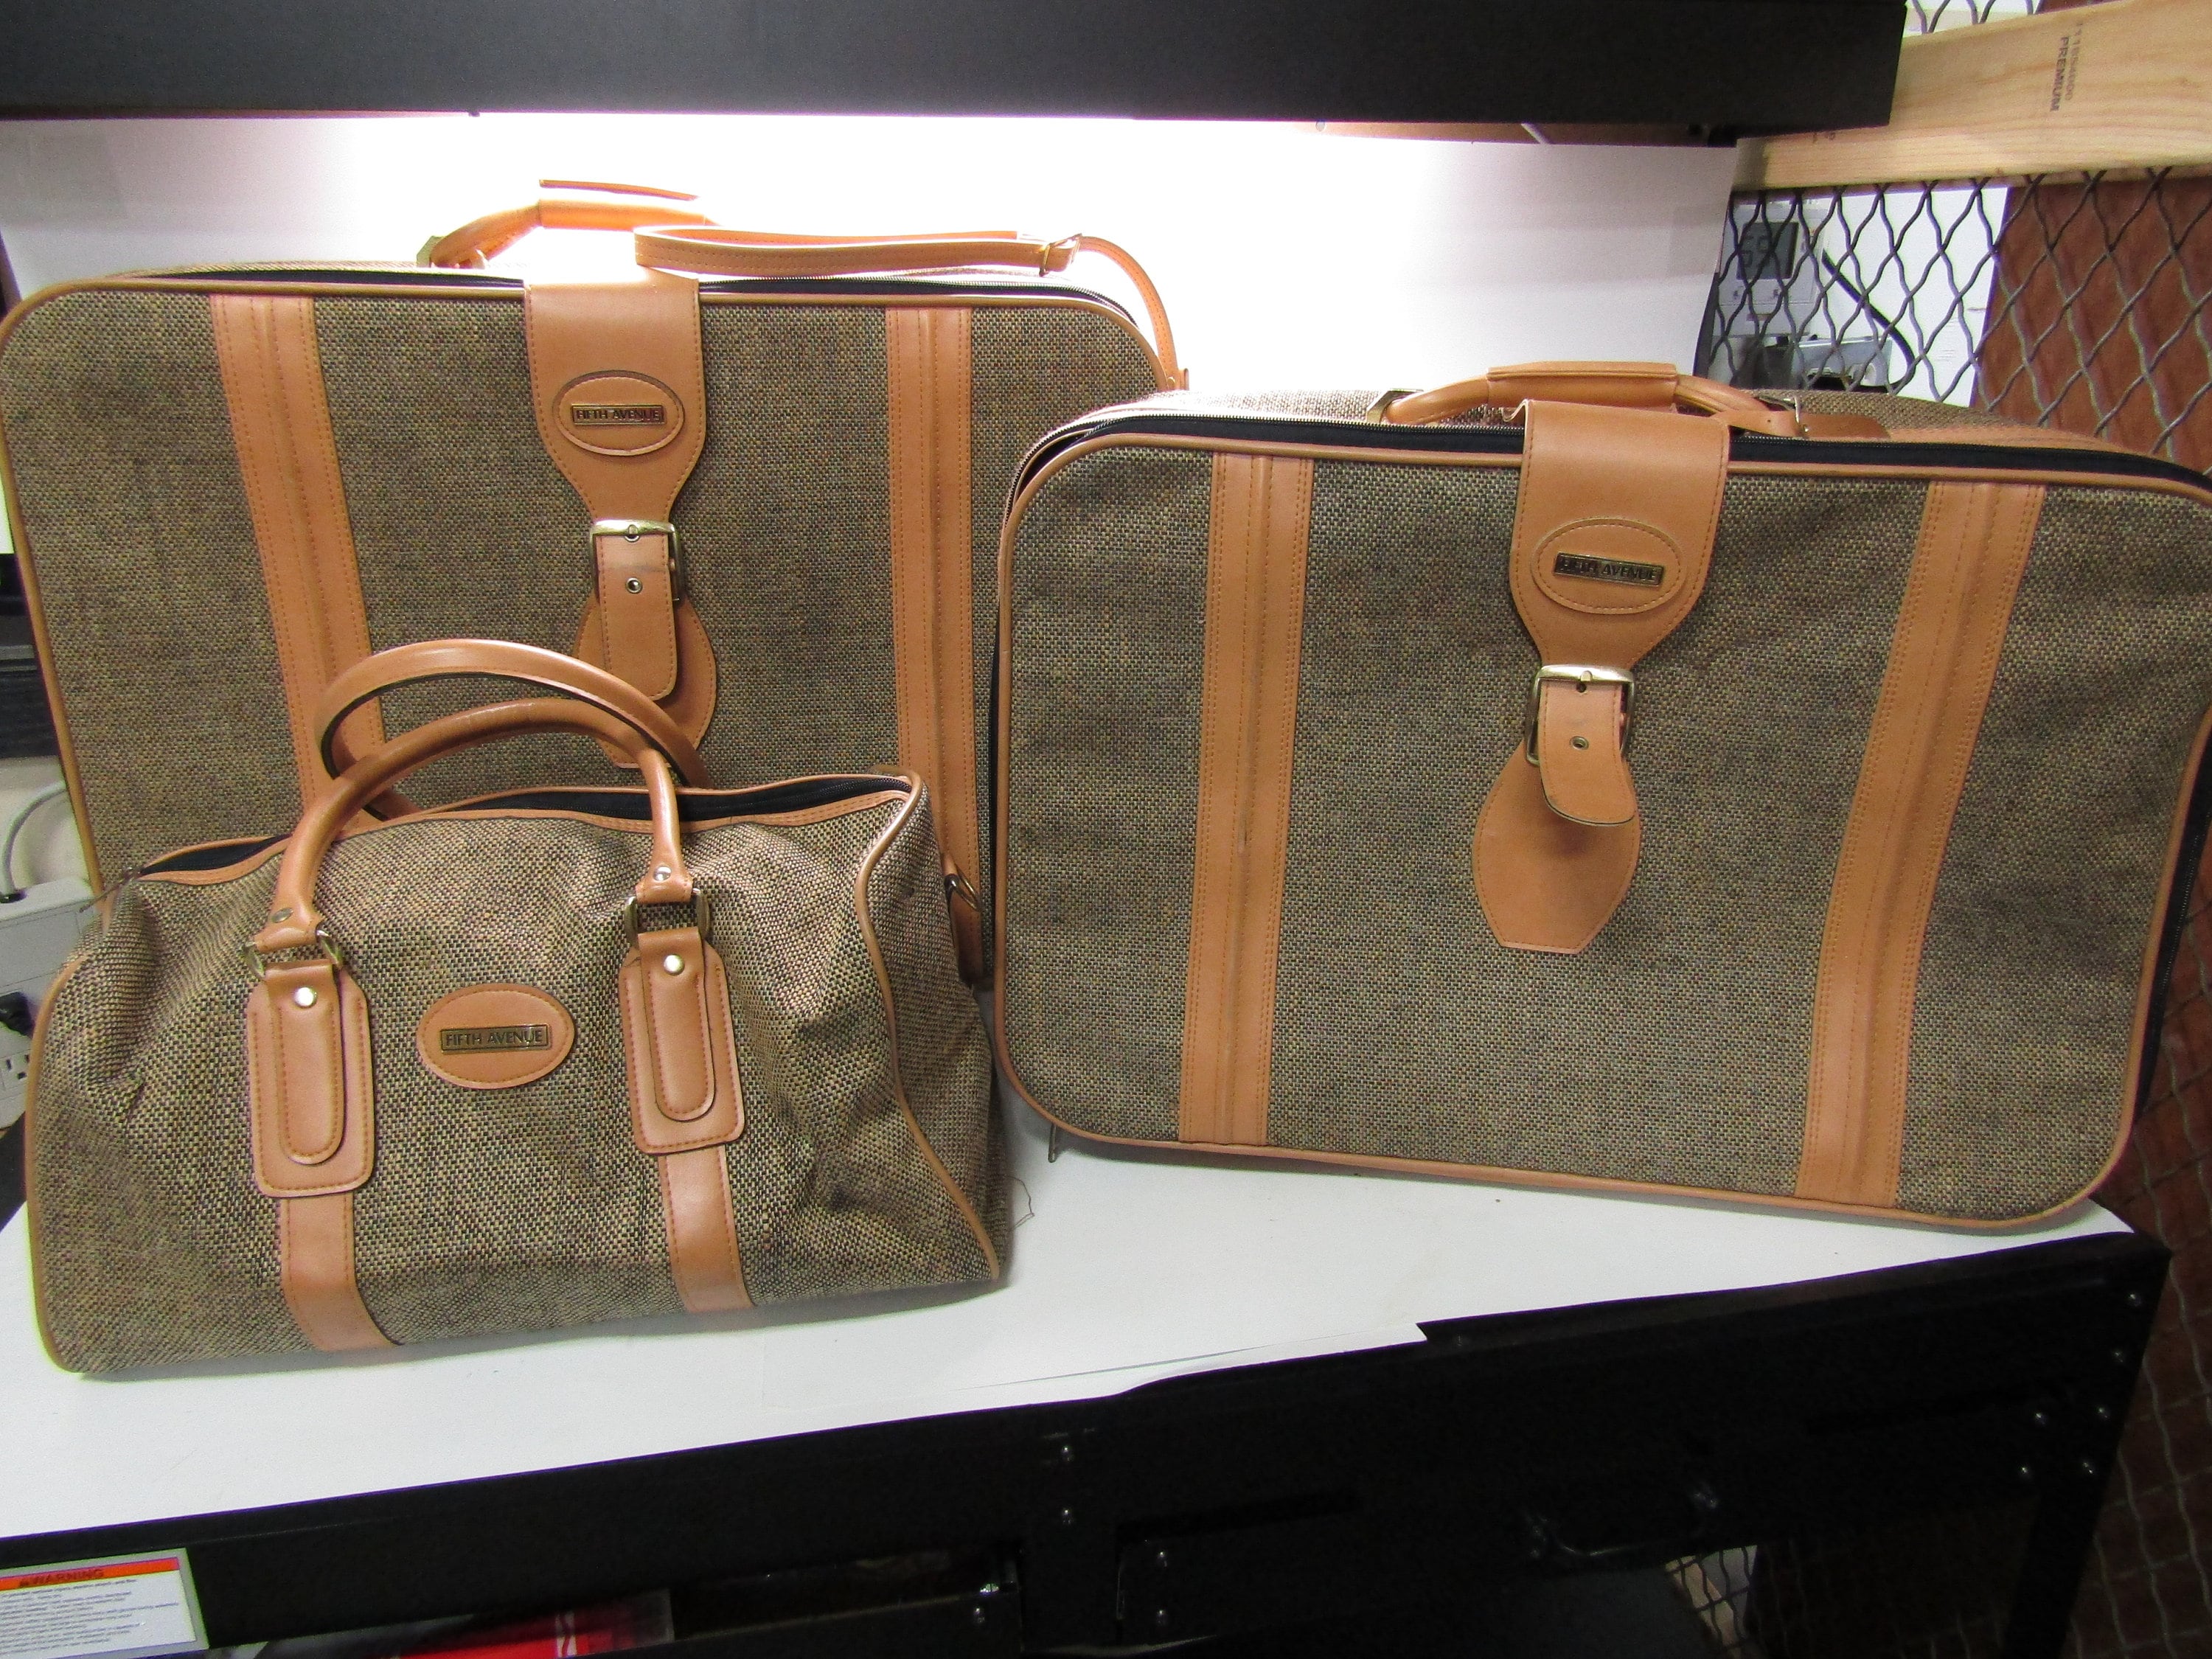 Saks Fifth Avenue Vintage Travel Luggage Set 3 Pc Womens Airport